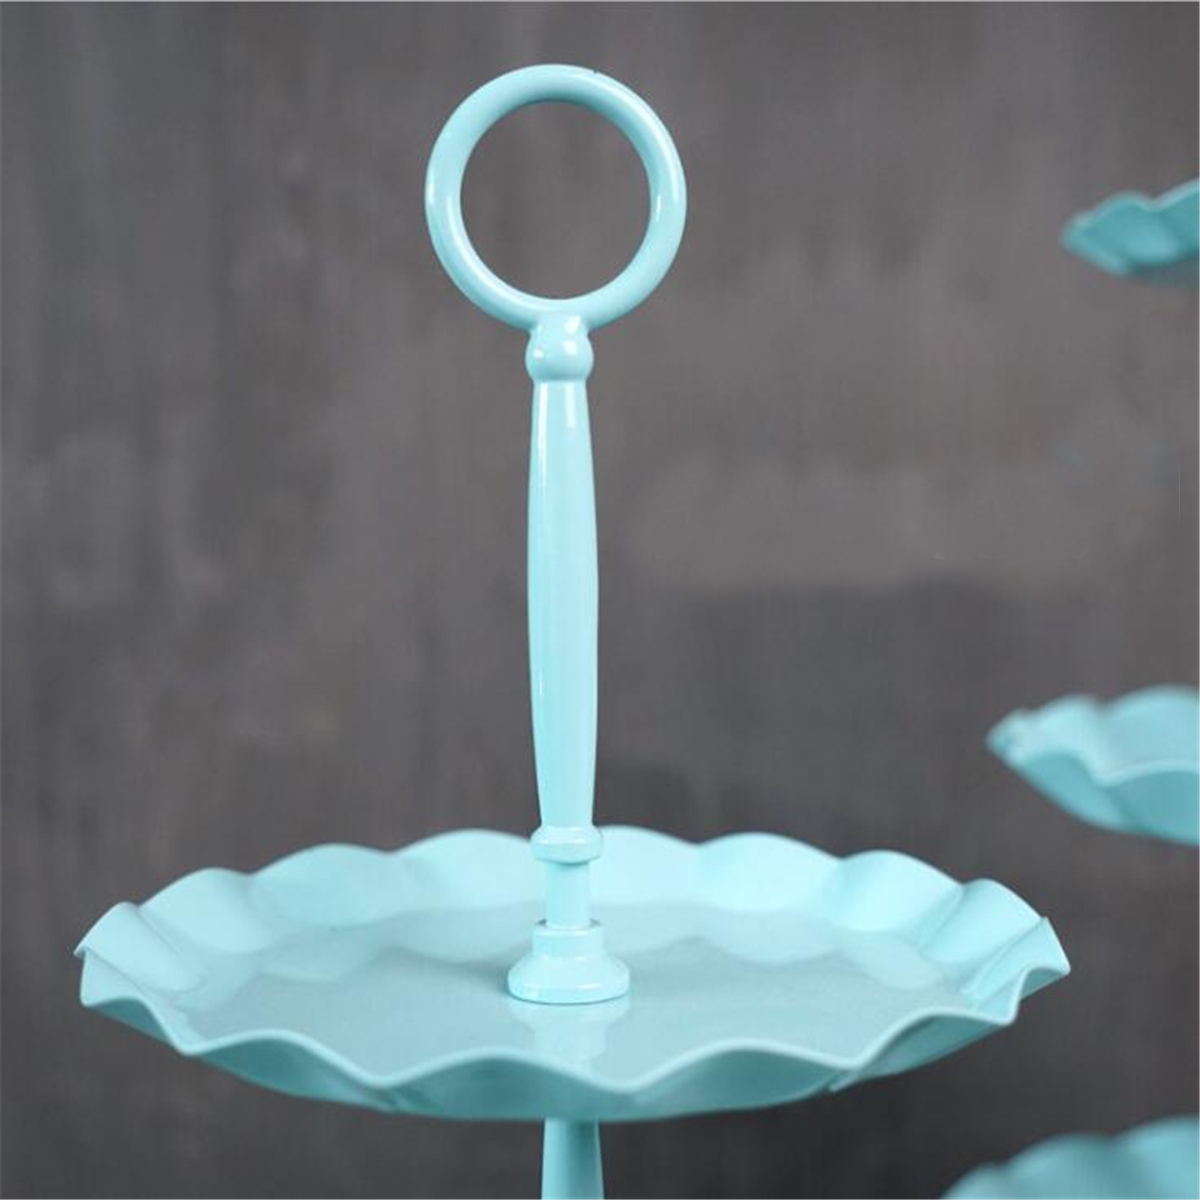 2--3-Ters-Blue-Cake-Holder-Cupcake-Stand-Birthday-Wedding-Party-Display-Holder-Decorations-1340743-3